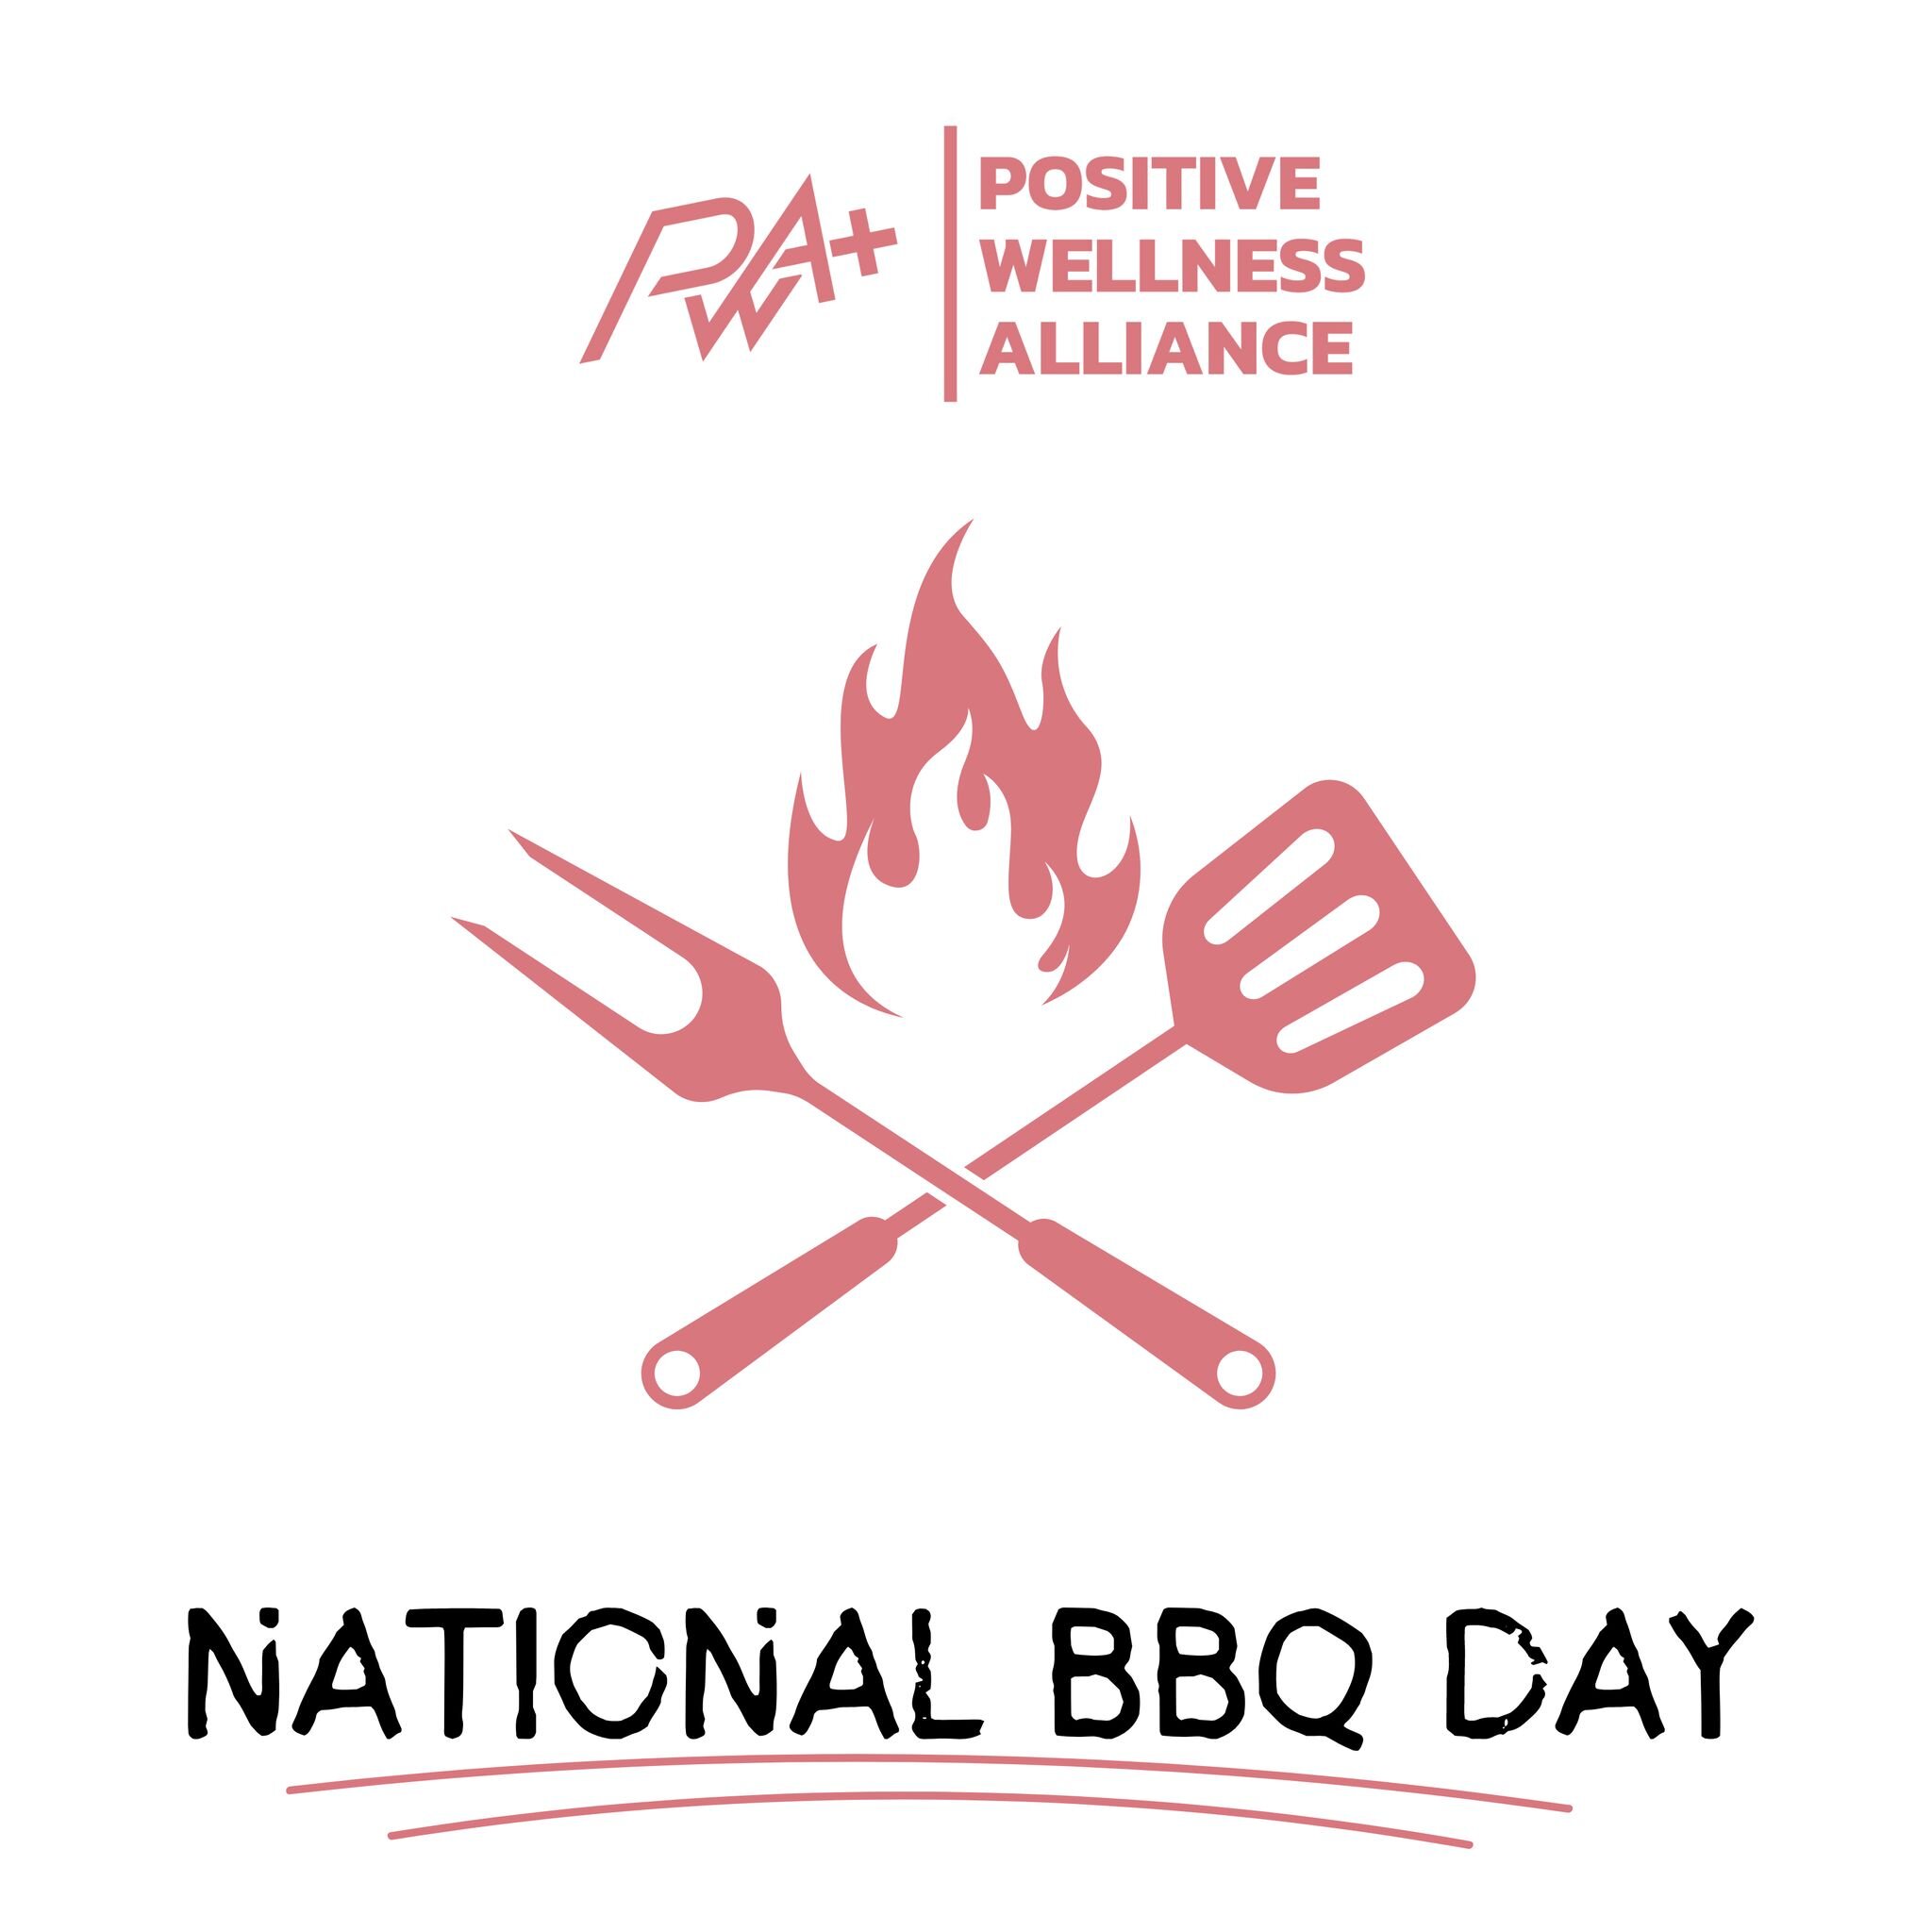 Today is #NationalBBQDay and so we have to ask: 

Which NC BBQ is better? Eastern, Lexington, or Western?

Let us know in the comments!